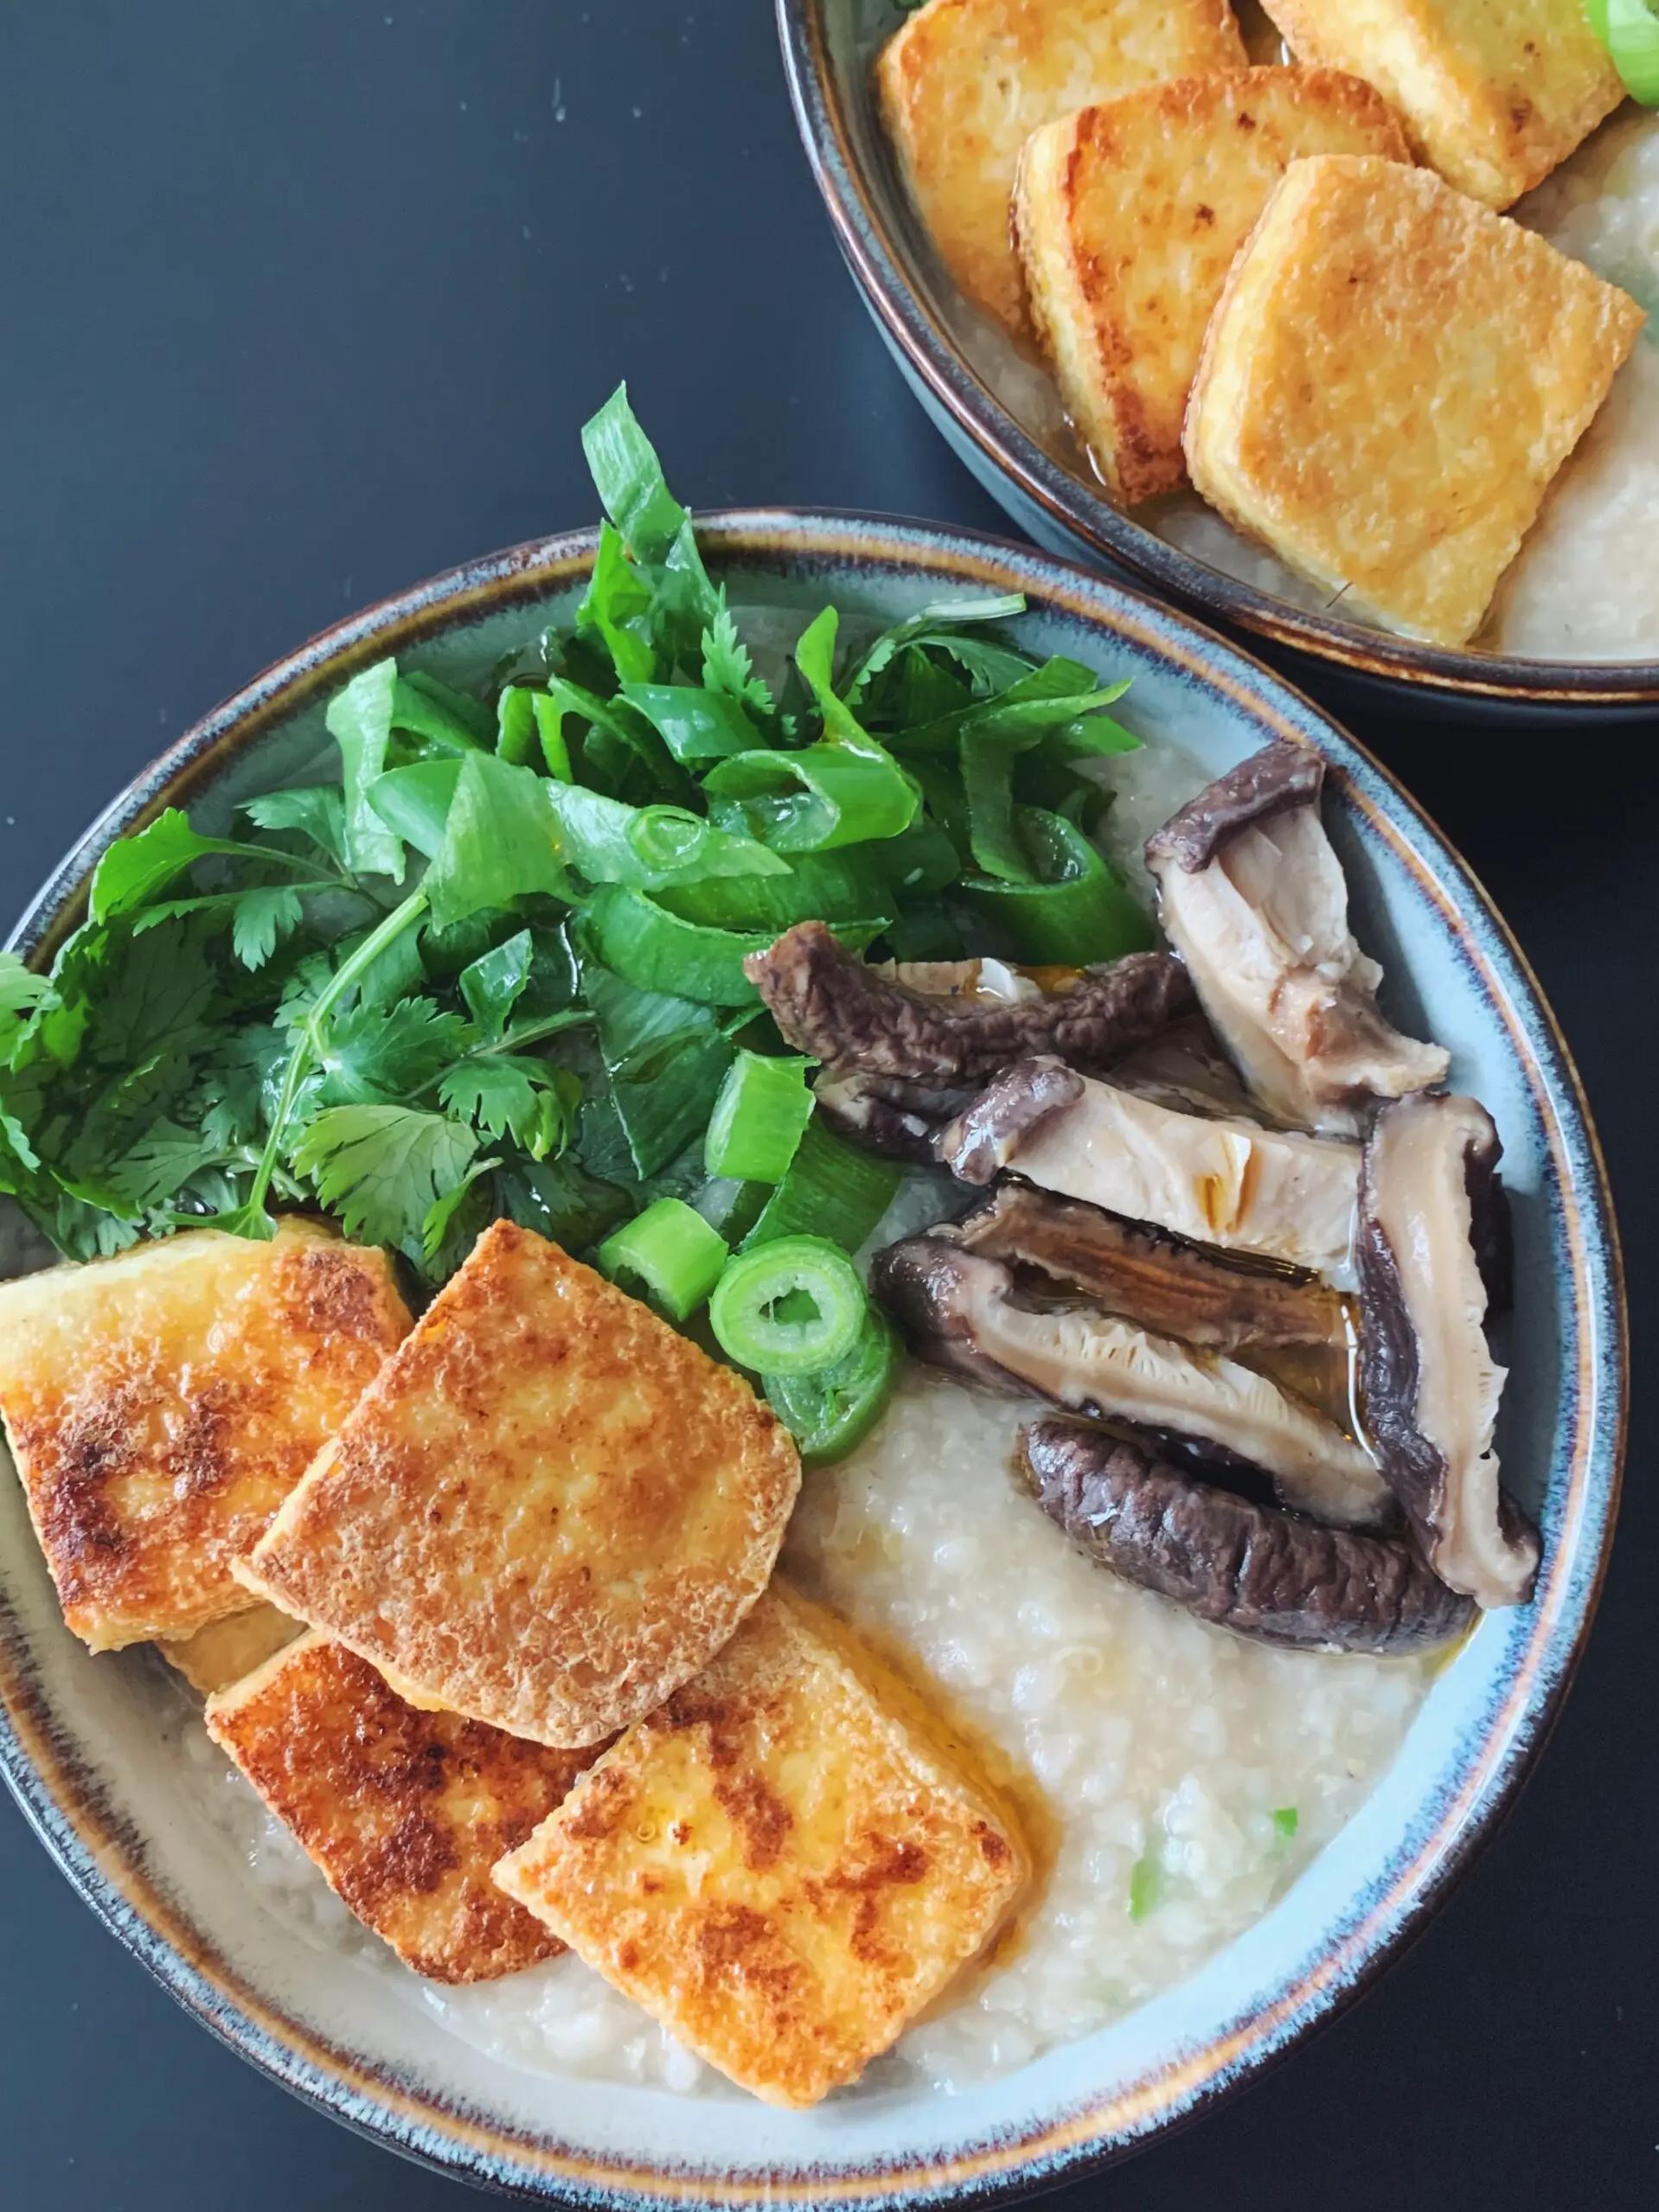  Congee is a versatile dish that can be eaten for breakfast, lunch, or dinner